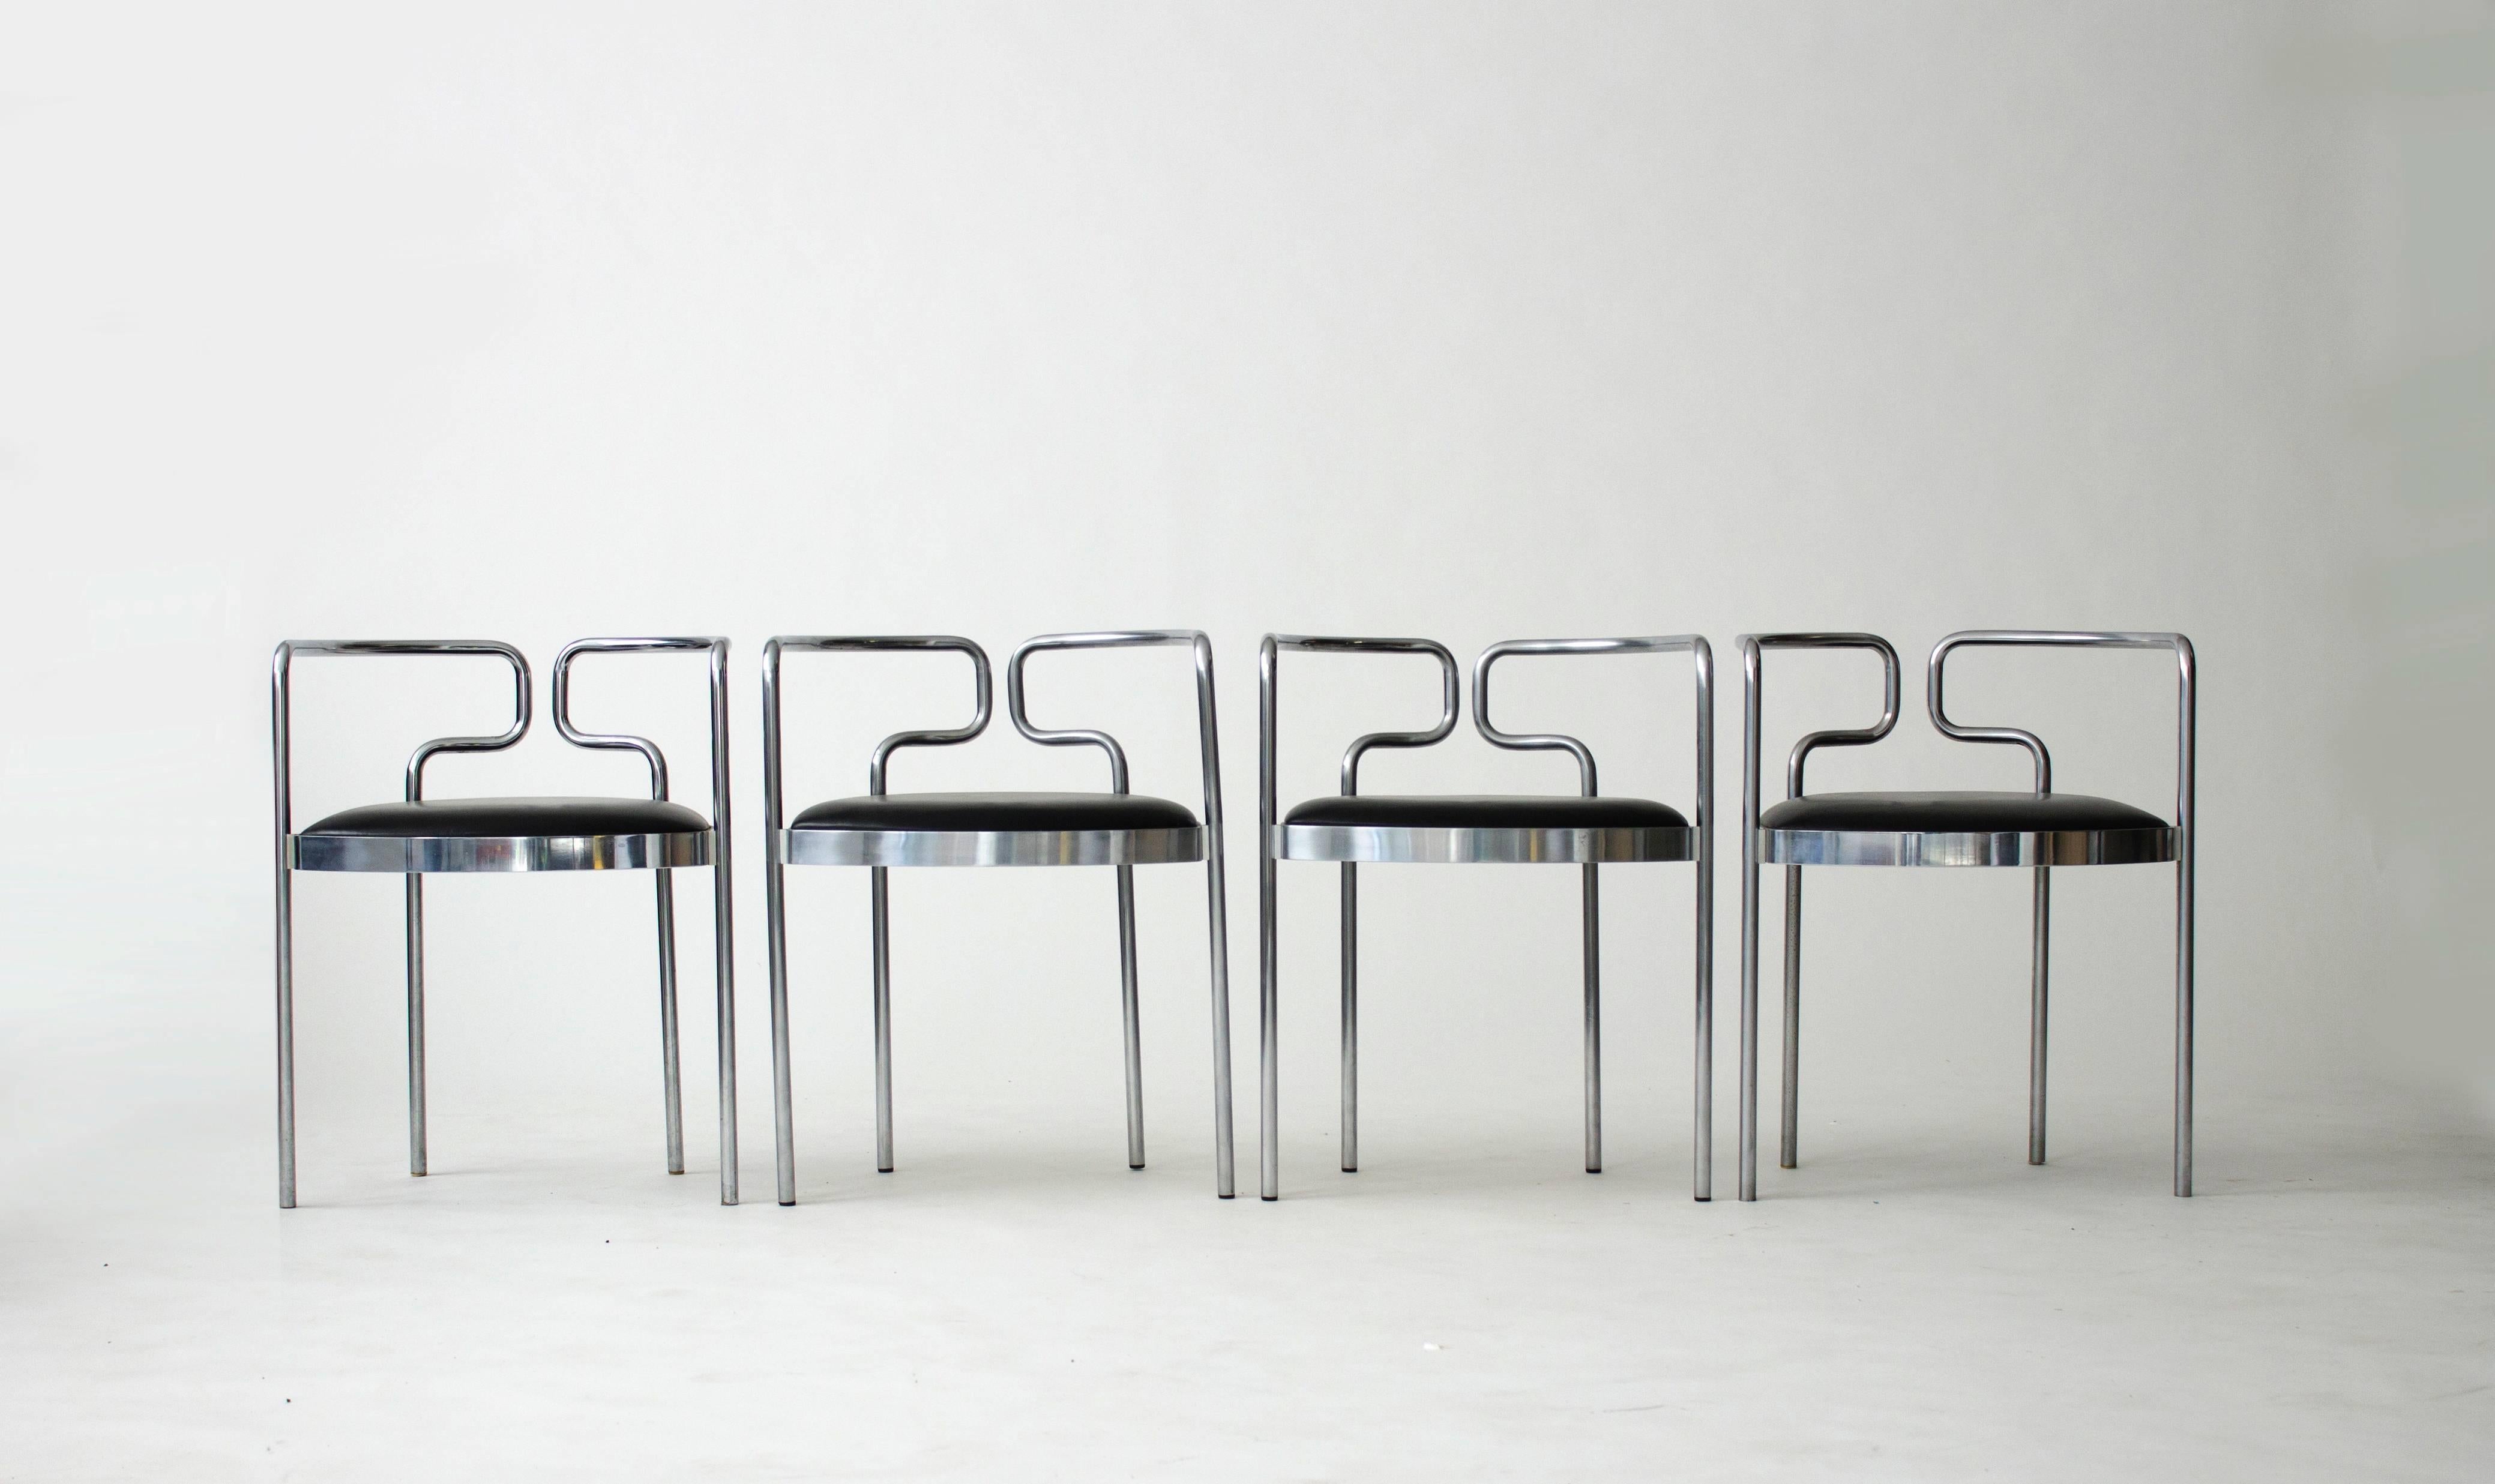 Set of four model #9230 chairs originally designed by Henning Larsen for the Kar Cafe in Copenhagen in 1967. This set of chairs was produced by Fritz Hansen in 1986 as part of a latter production run. In chromium-plated steel tubing with leather